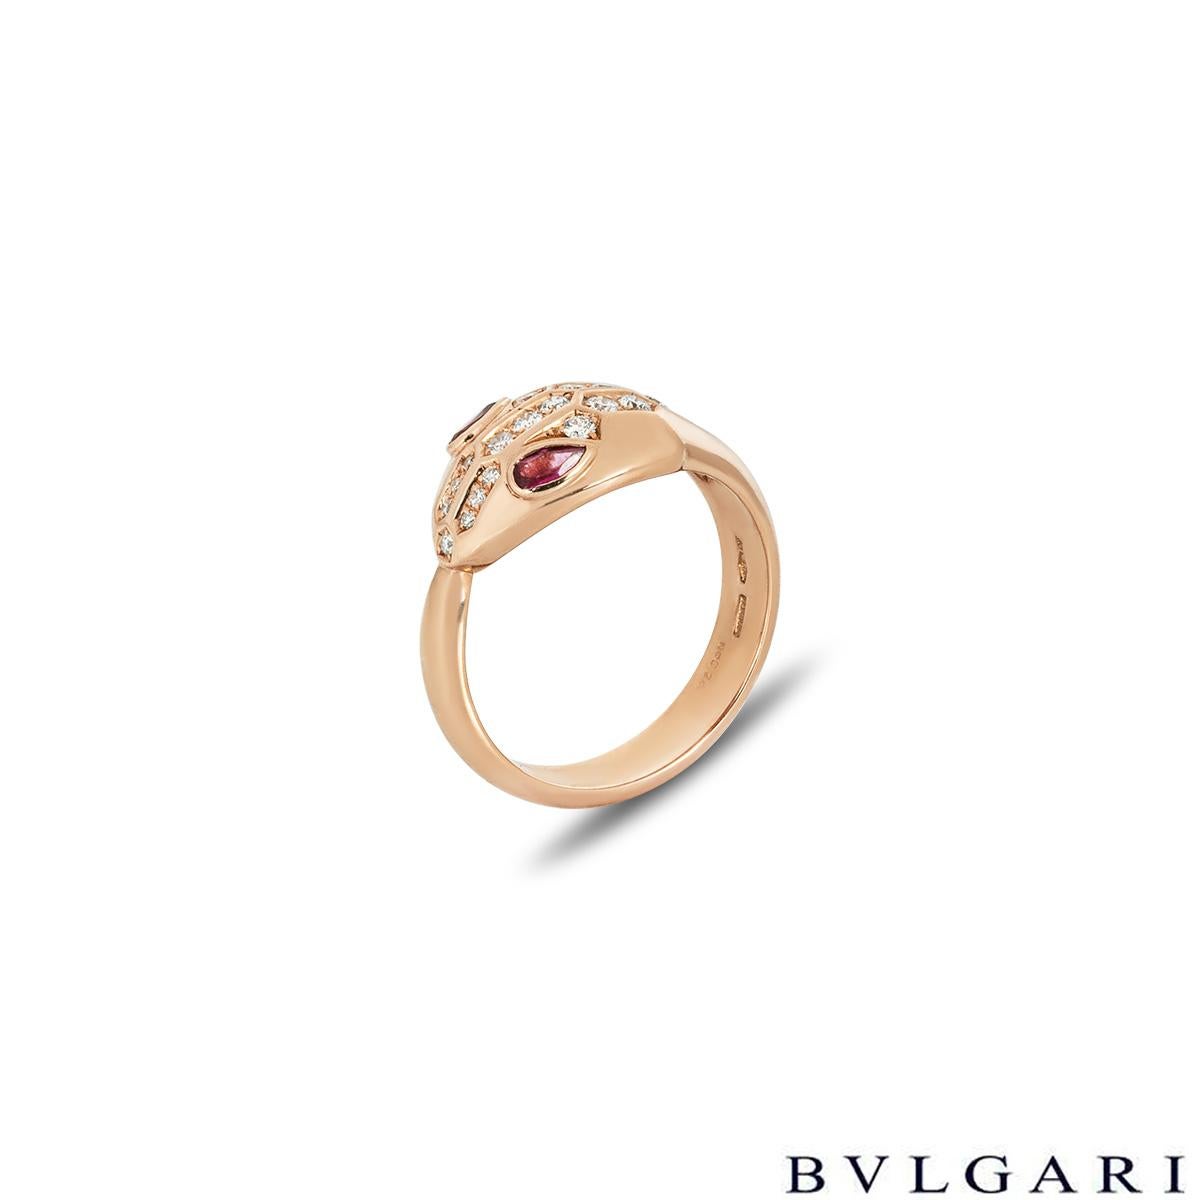 A stylish 18k rose gold diamond and rubellite ring by Bvlgari from the Serpenti Seduttori collection. The ring is composed of a snake design throughout with a diamond set head and rubellite eyes. The 18 round brilliant cut diamonds have an